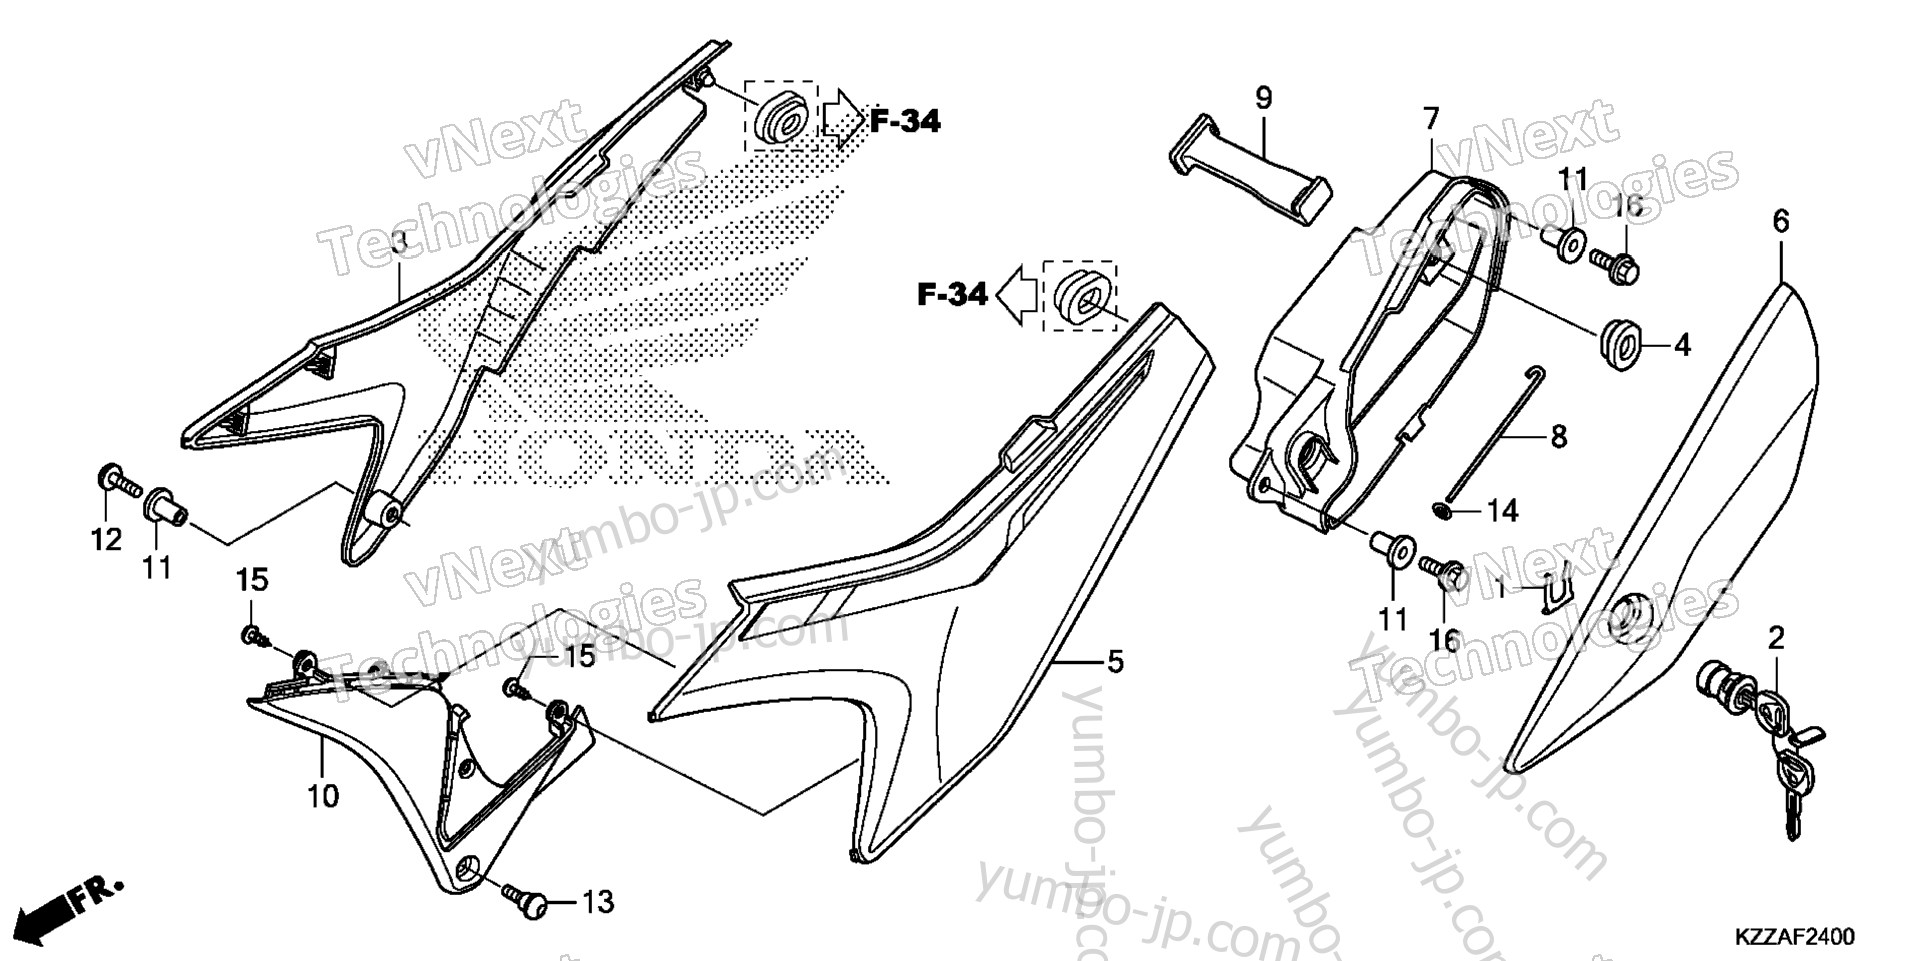 SIDE COVER (1) for motorcycles HONDA CRF250LA AC 2017 year